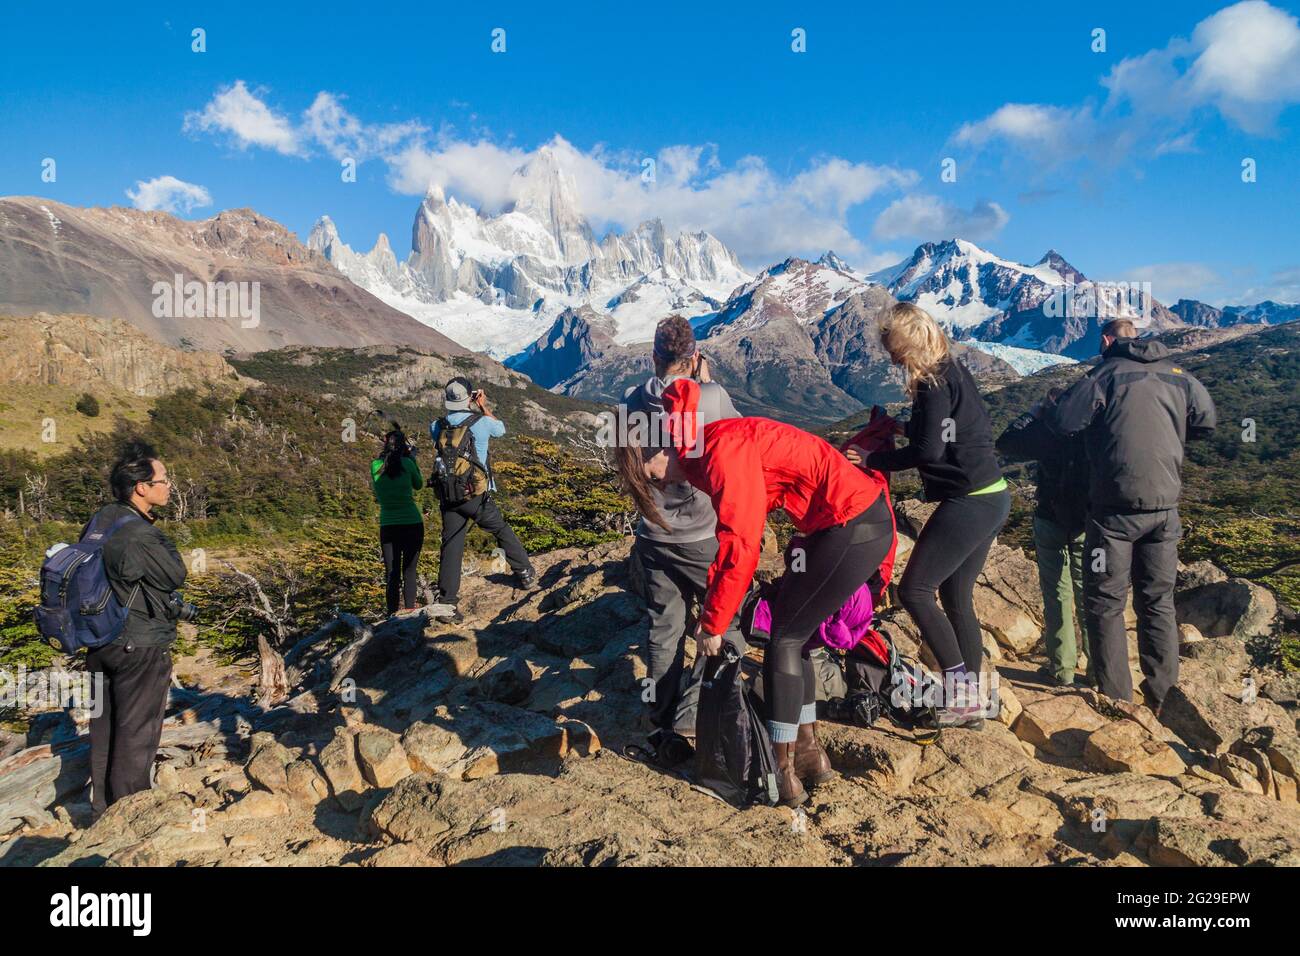 EL CHALTEN, ARGENTINA - MARCH 11, 2015: Tourist watch Fitz Roy mountain in National Park Los Glaciares, Patagonia, Argentina Stock Photo